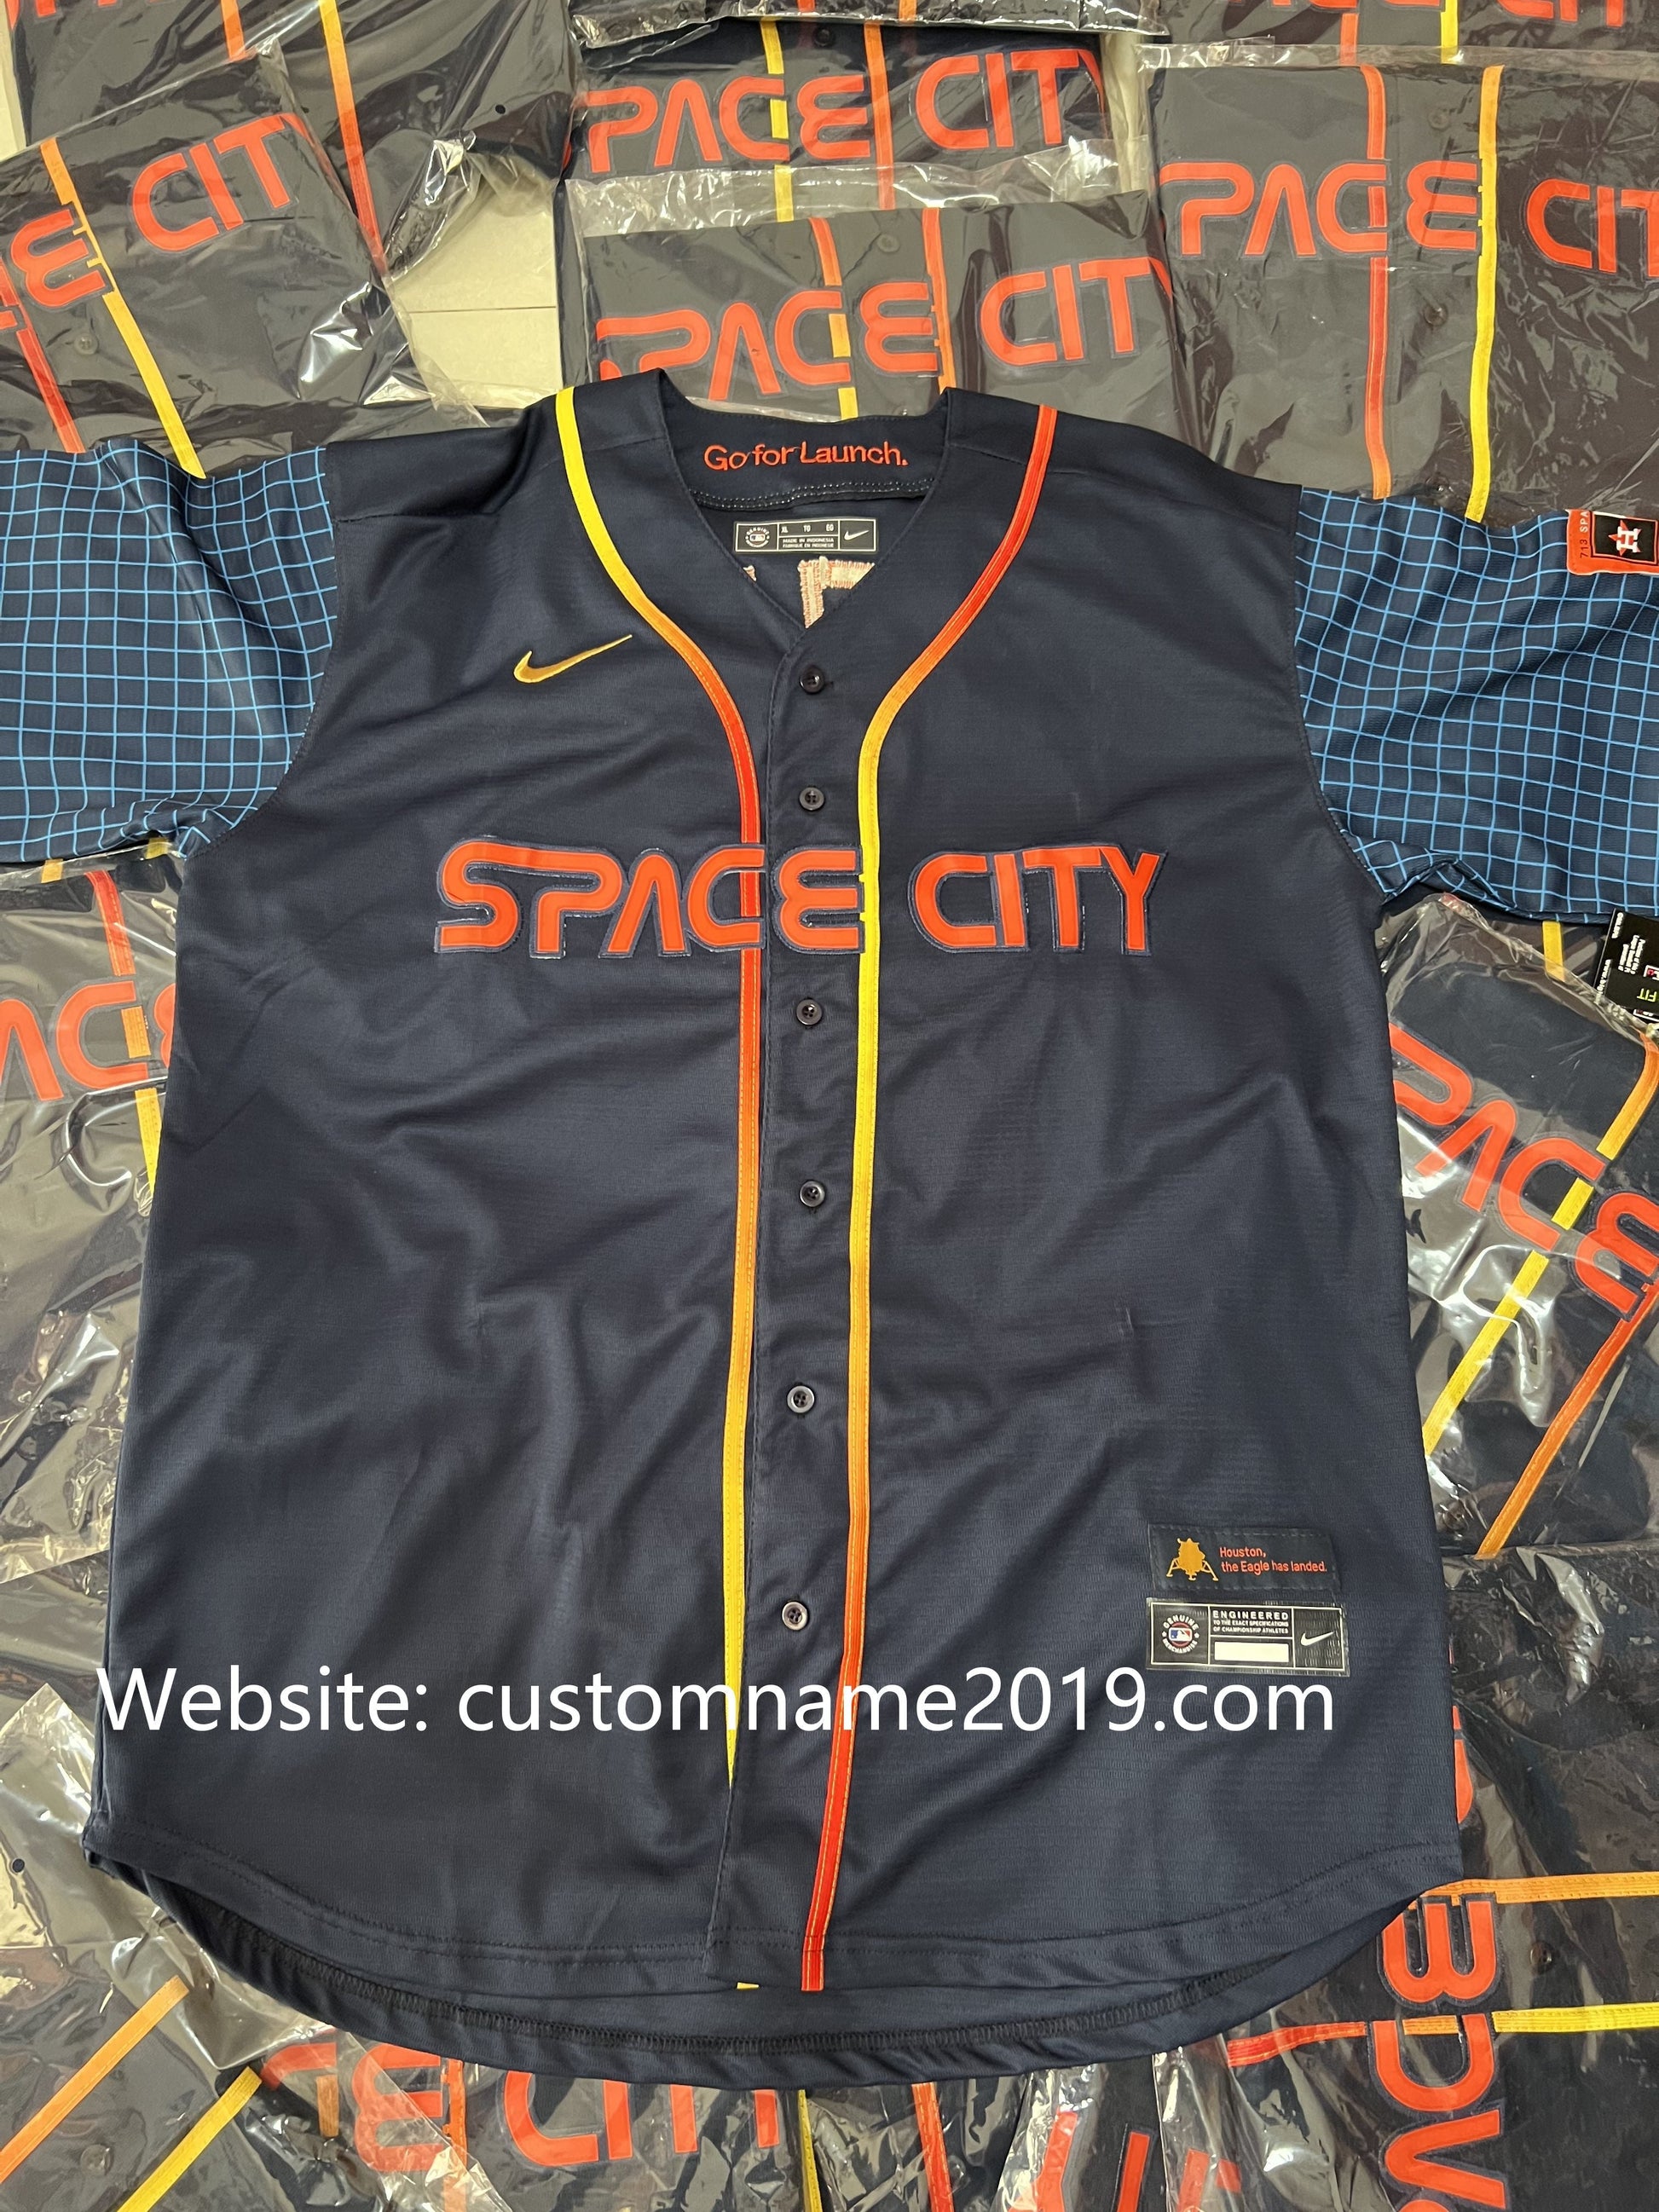 STILL TIPPIN' 🔥🤘 Custom SPACE CITY jersey letter & number kit